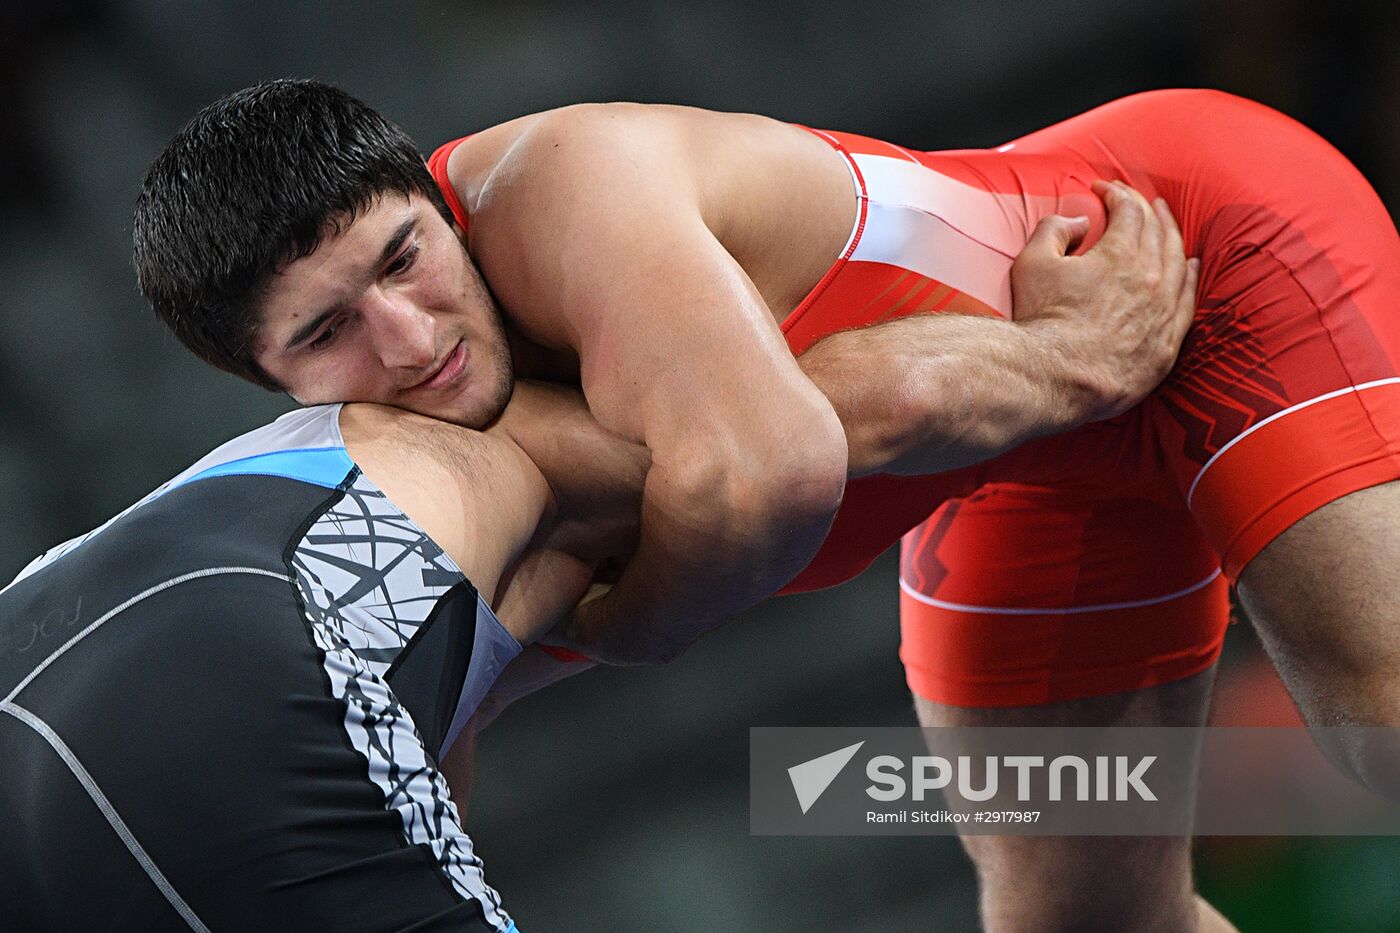 2016 Summer Olympics. Freestyle wrestling. Men. Day Two